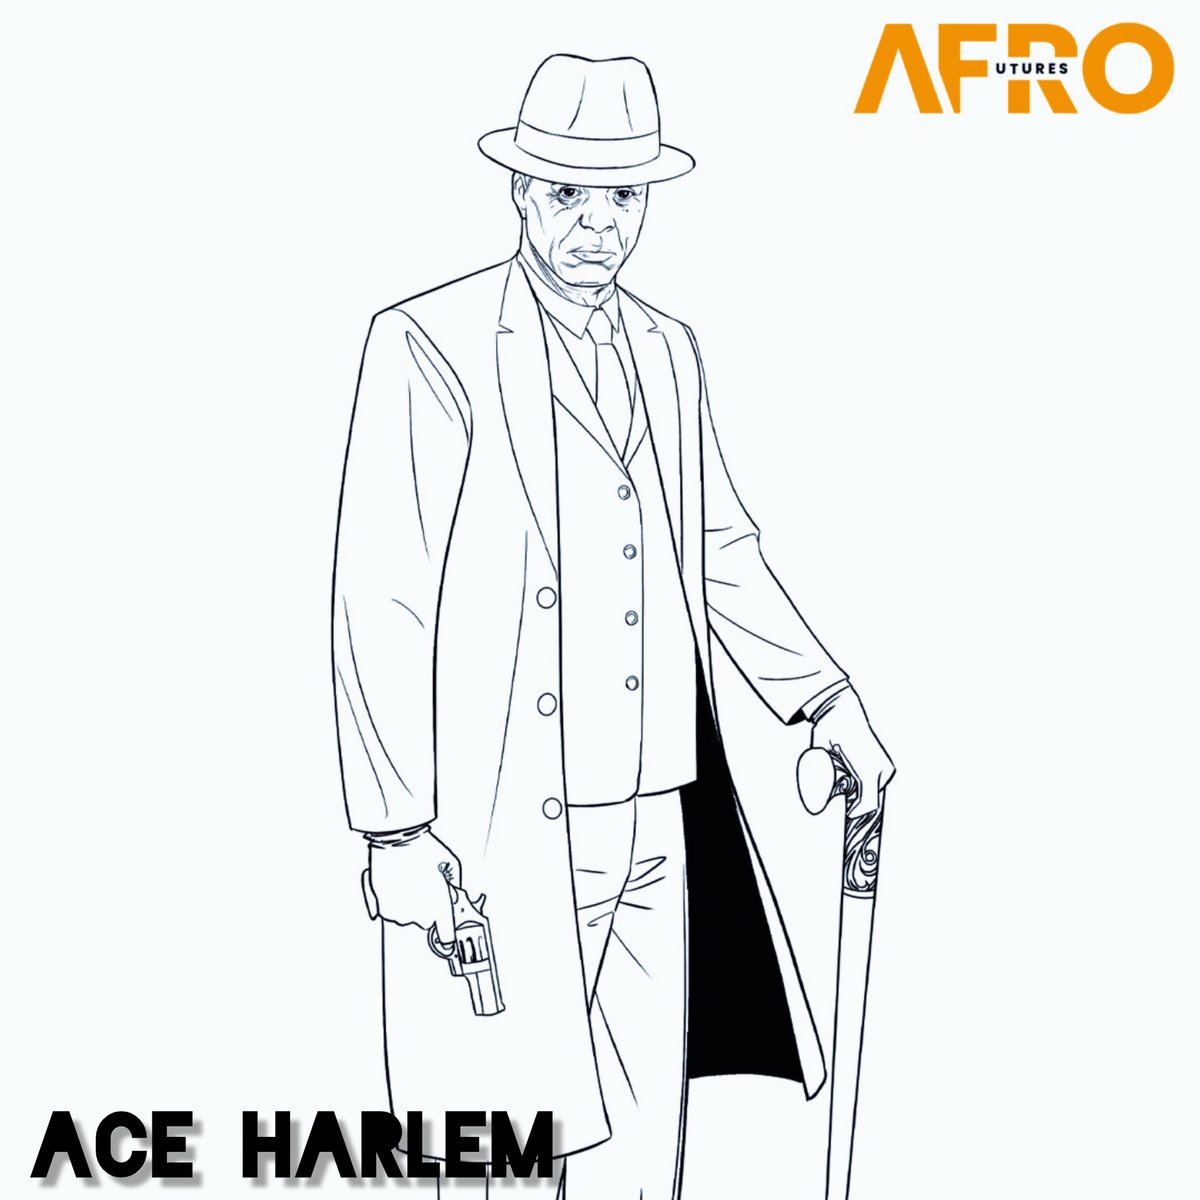 💣///💥 AFROFUTURES. ACE HARLEM, the world's greatest detective. What has Ace been doing these last few decades? Find out in AFROFUTURES. Coming soon from @RexCoComics. 🔥 Art by @nelsonblake2 🌿🚬💨Like, share, pass it along #CreatetheCulture #Afrofuturism #blackartist